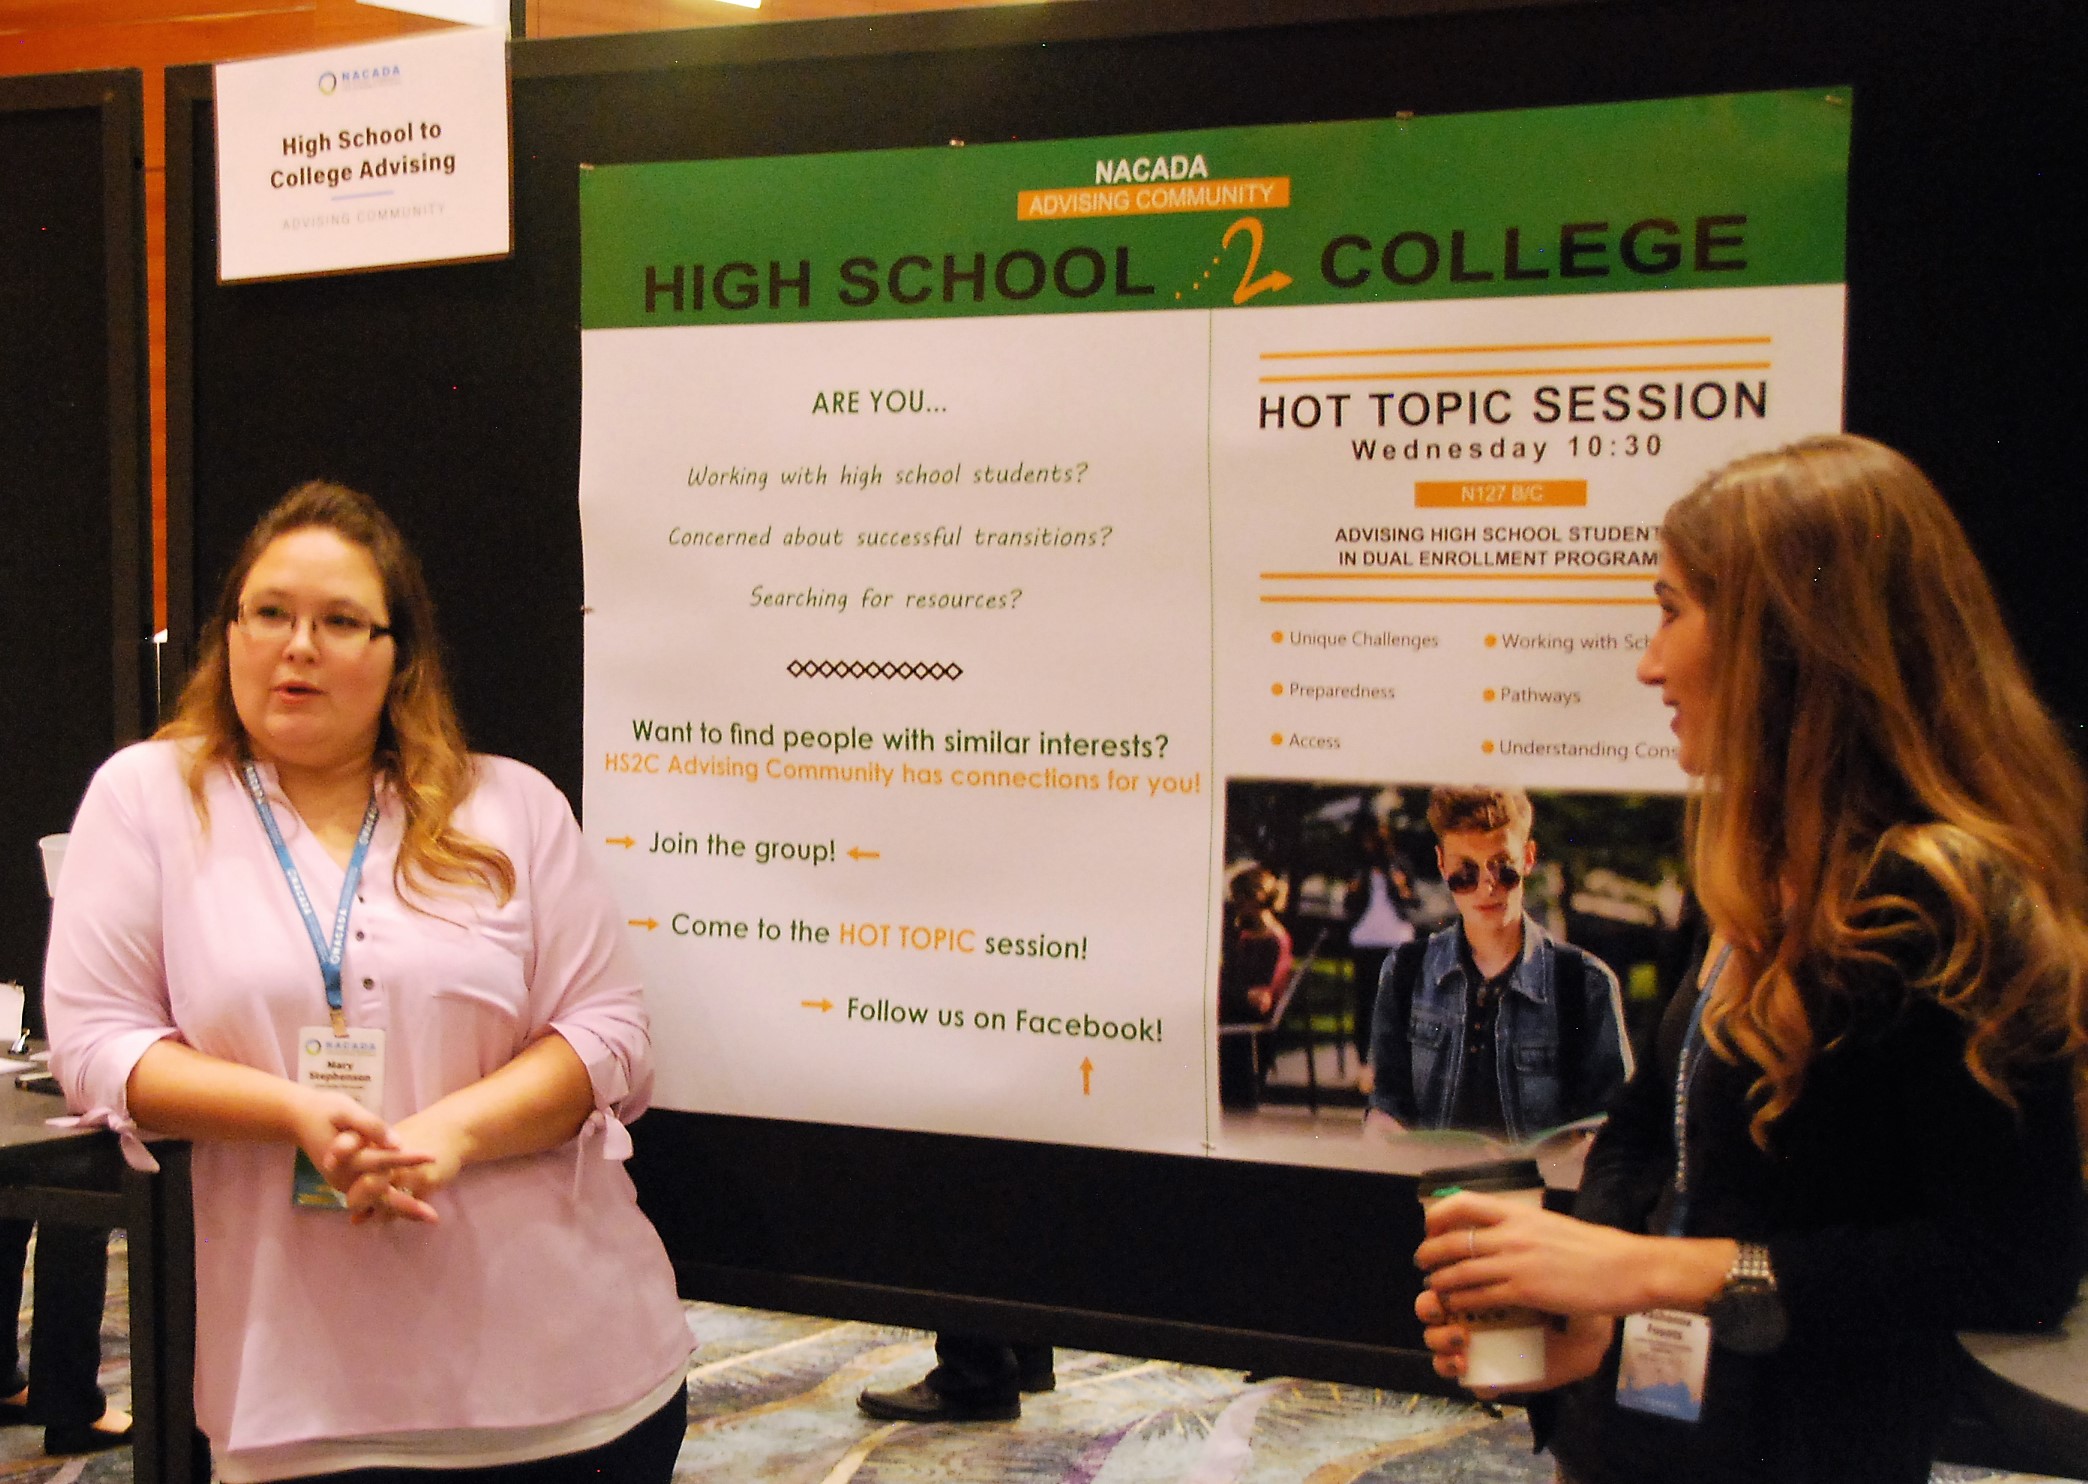 High School to College AC Poster at ACD Fair, Phoenix, 2018